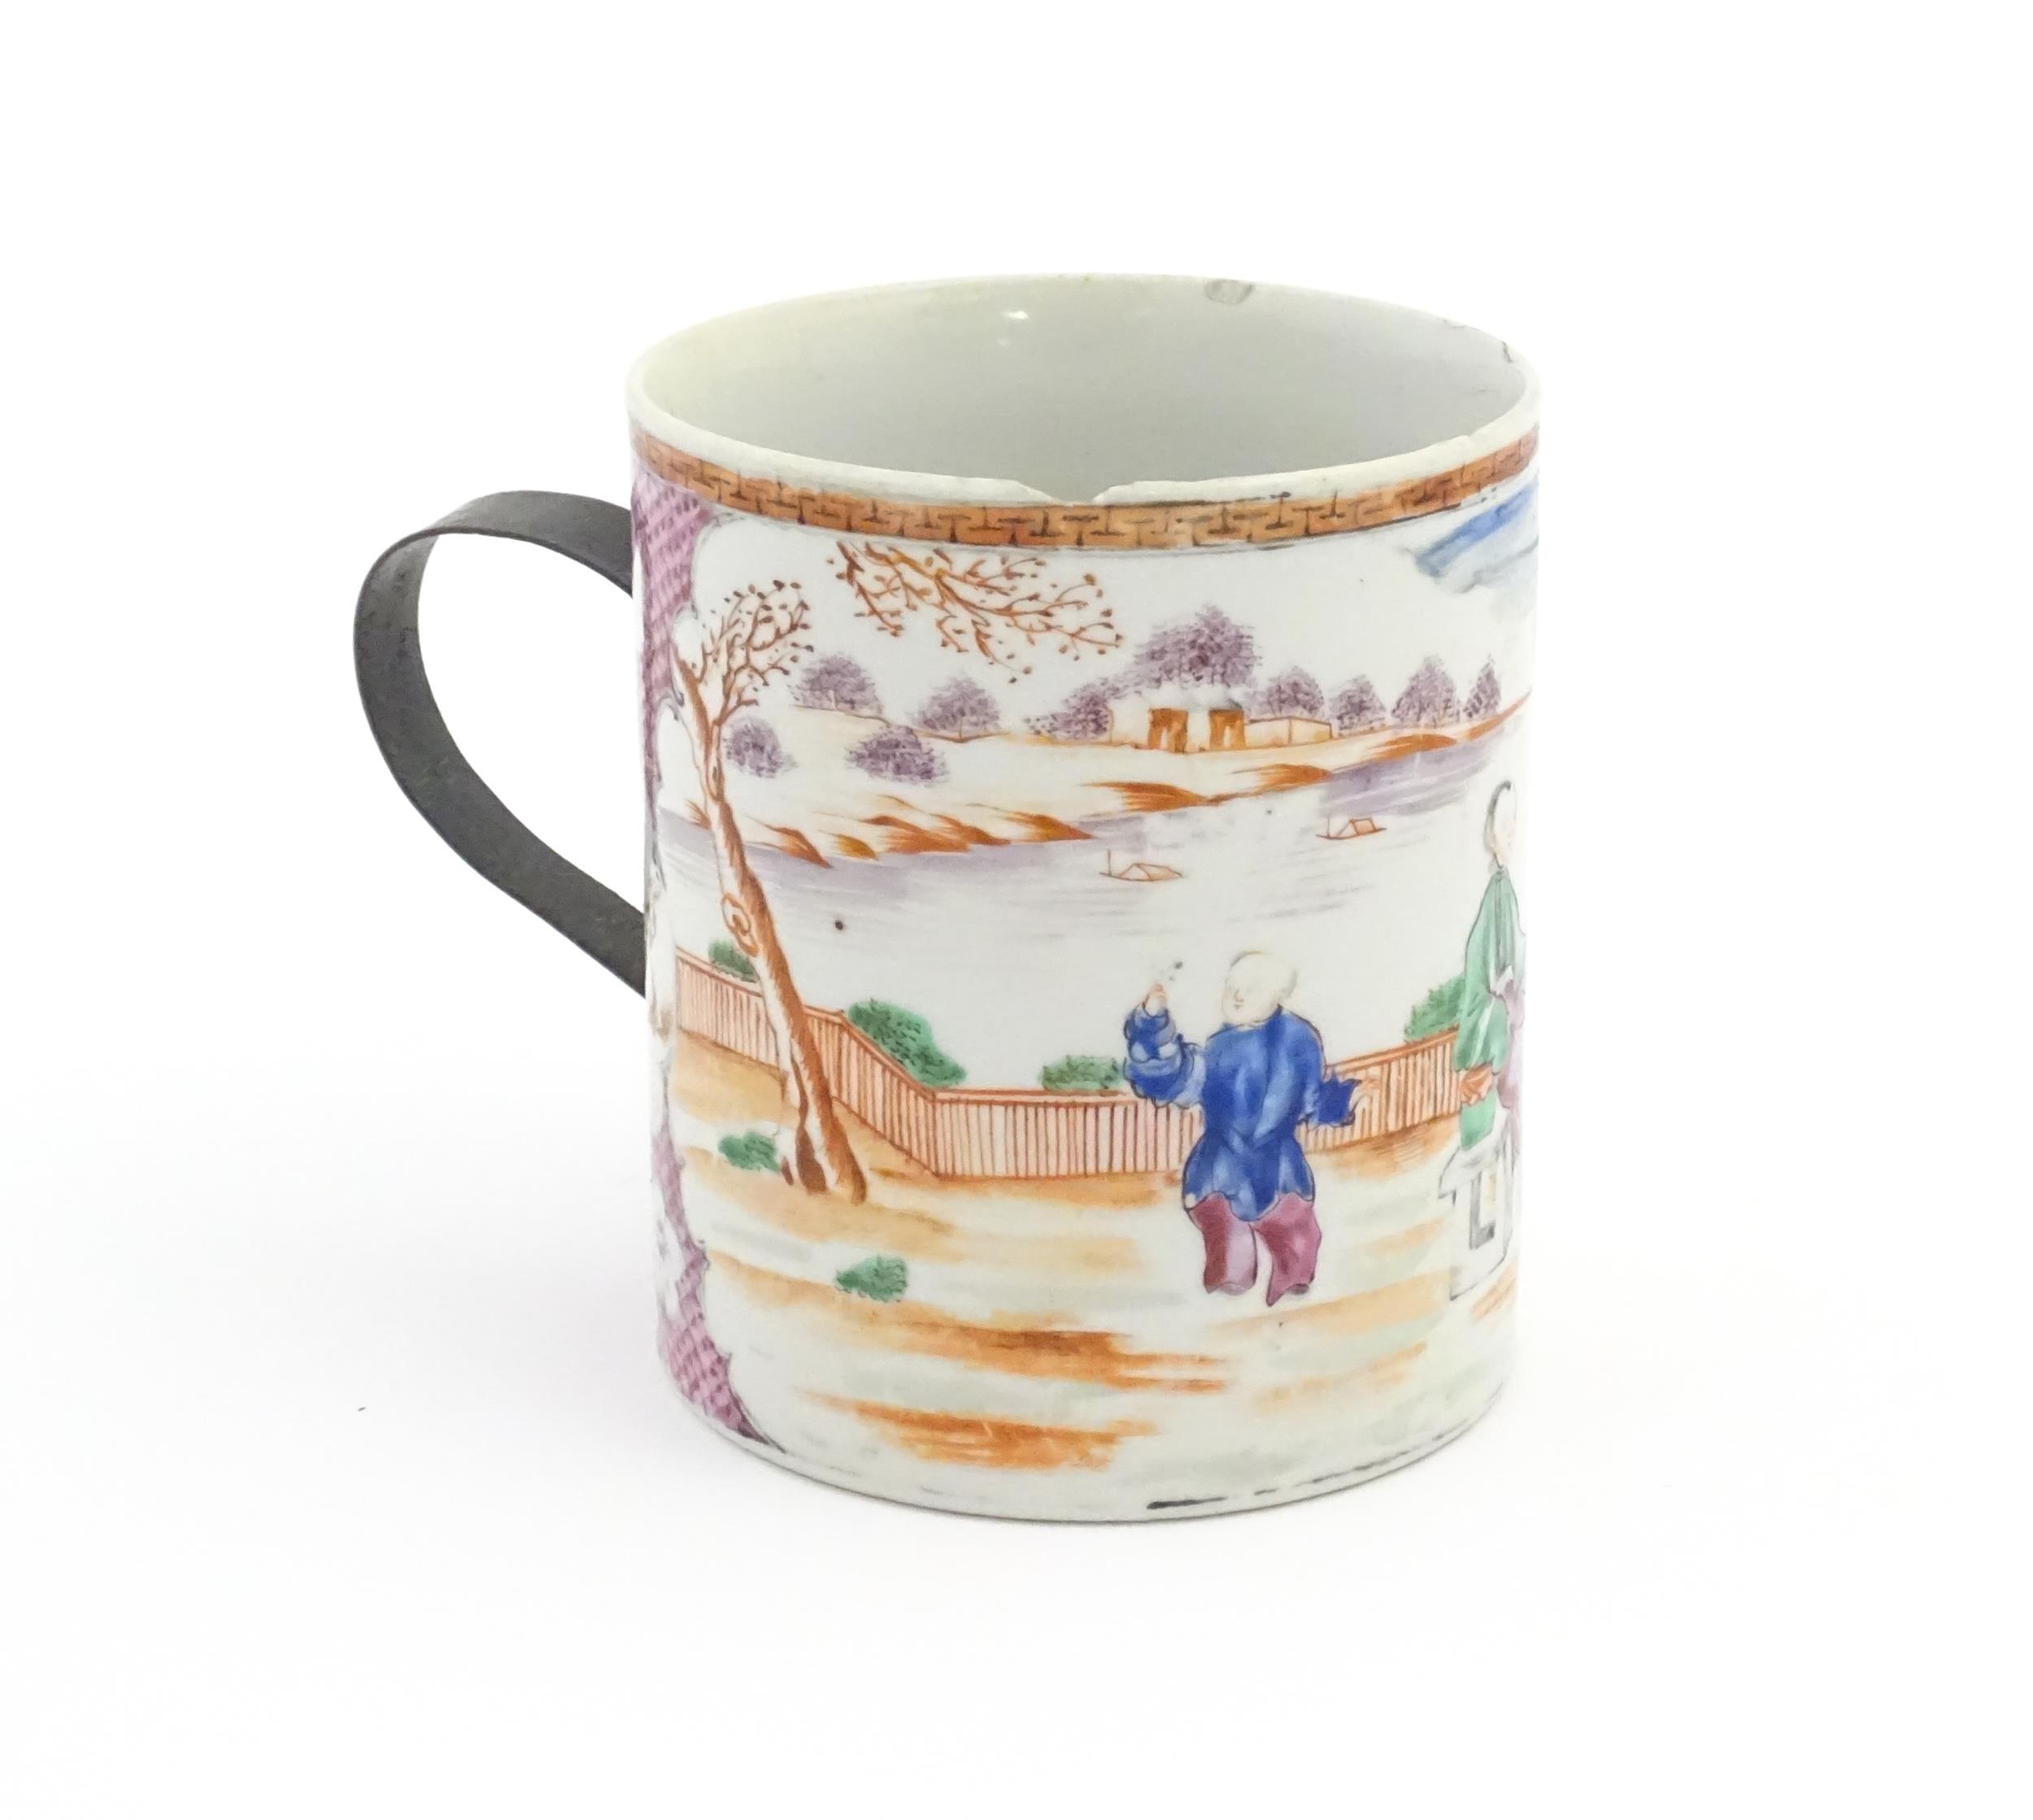 A large Chinese famille rose tankard decorated with figures in a landscape scene. Approx. 5 3/4"